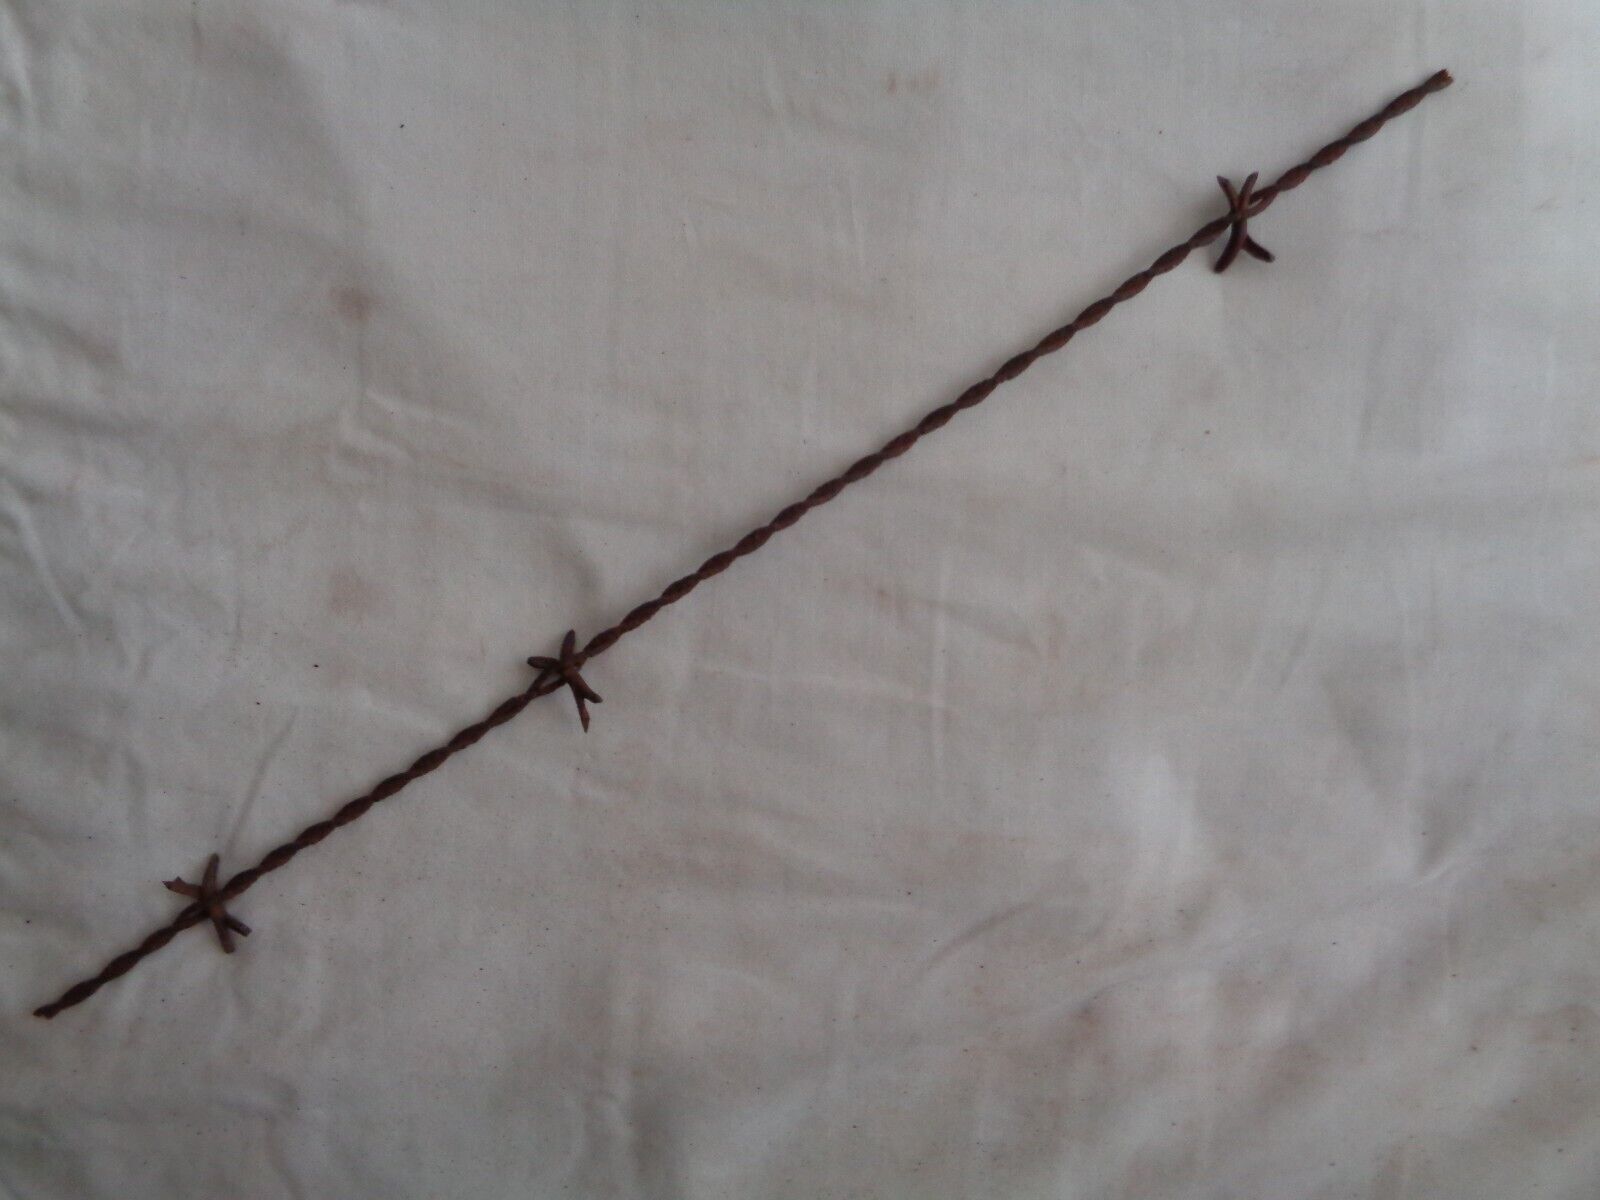 Antique Barbed Wire, # 574 B, TYLER LORD of Joliet, IL 1884